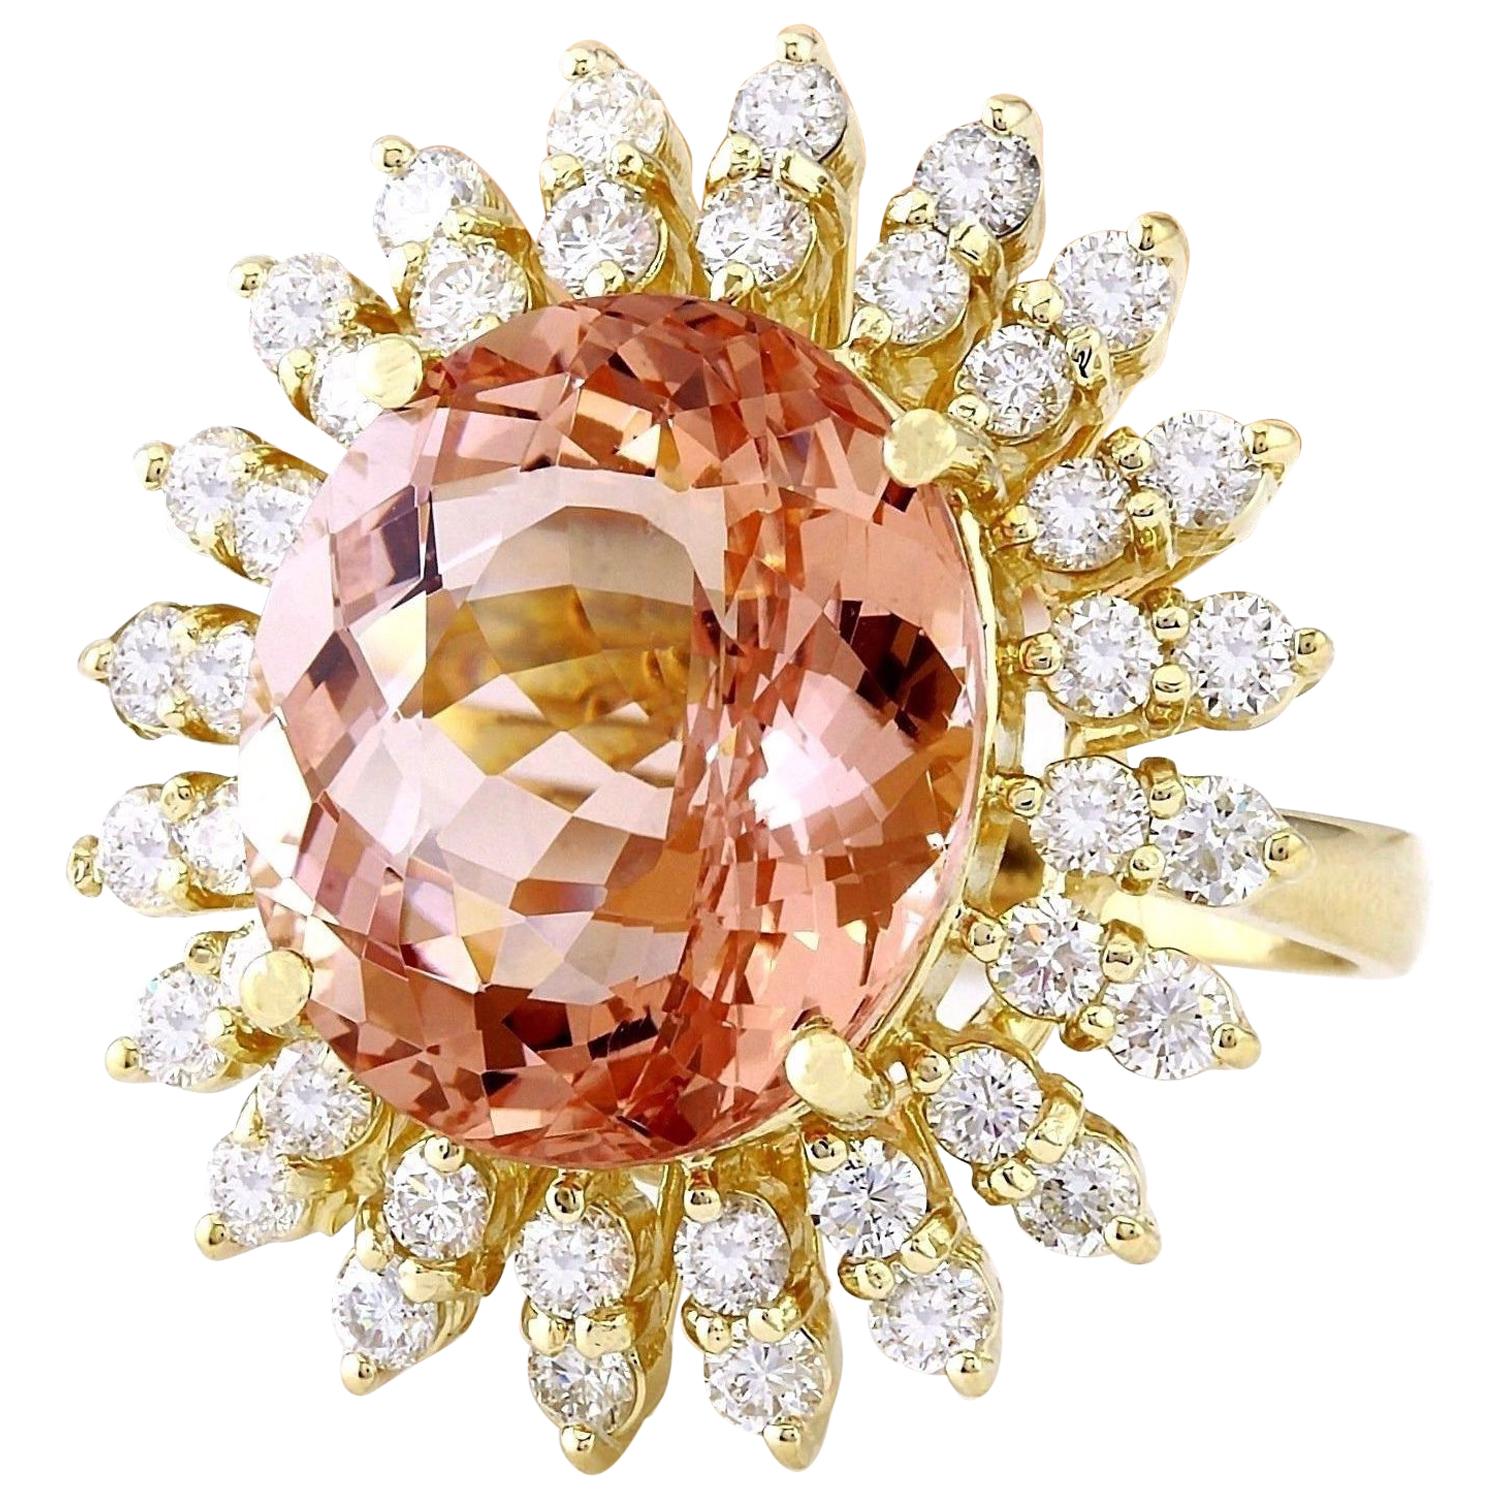 Introducing our stunning 15.01 Carat Morganite Ring, crafted in luxurious 14K Solid Yellow Gold. The centerpiece of this exquisite piece is a mesmerizing oval-cut morganite, weighing 13.01 carats and measuring 16.00x12.00 mm. Surrounding this